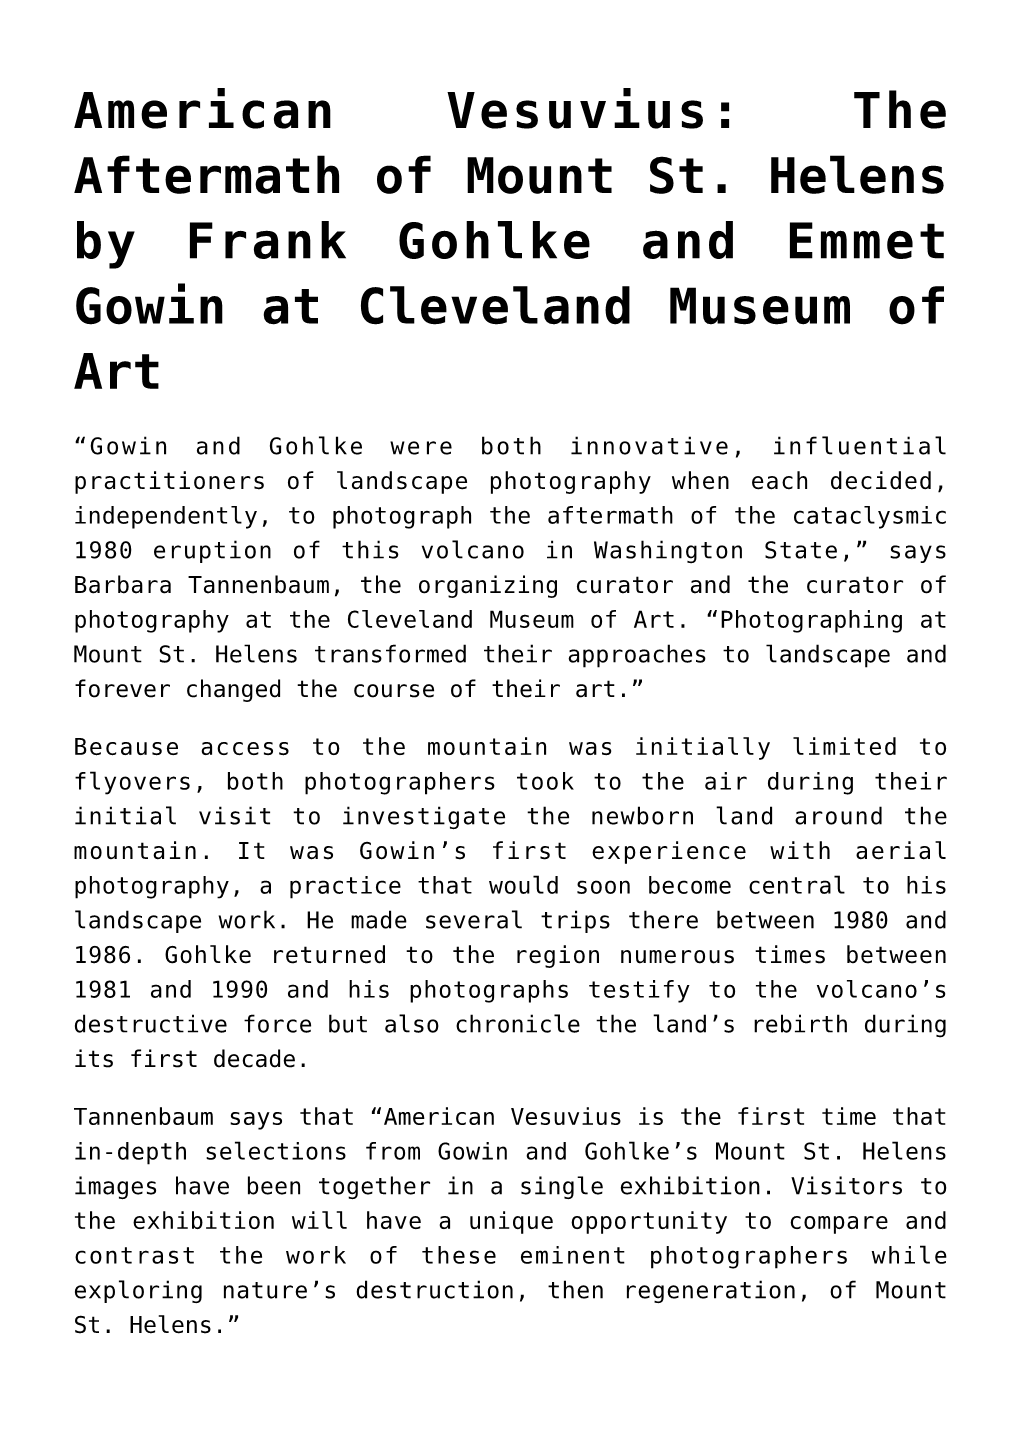 The Aftermath of Mount St. Helens by Frank Gohlke and Emmet Gowin at Cleveland Museum of Art